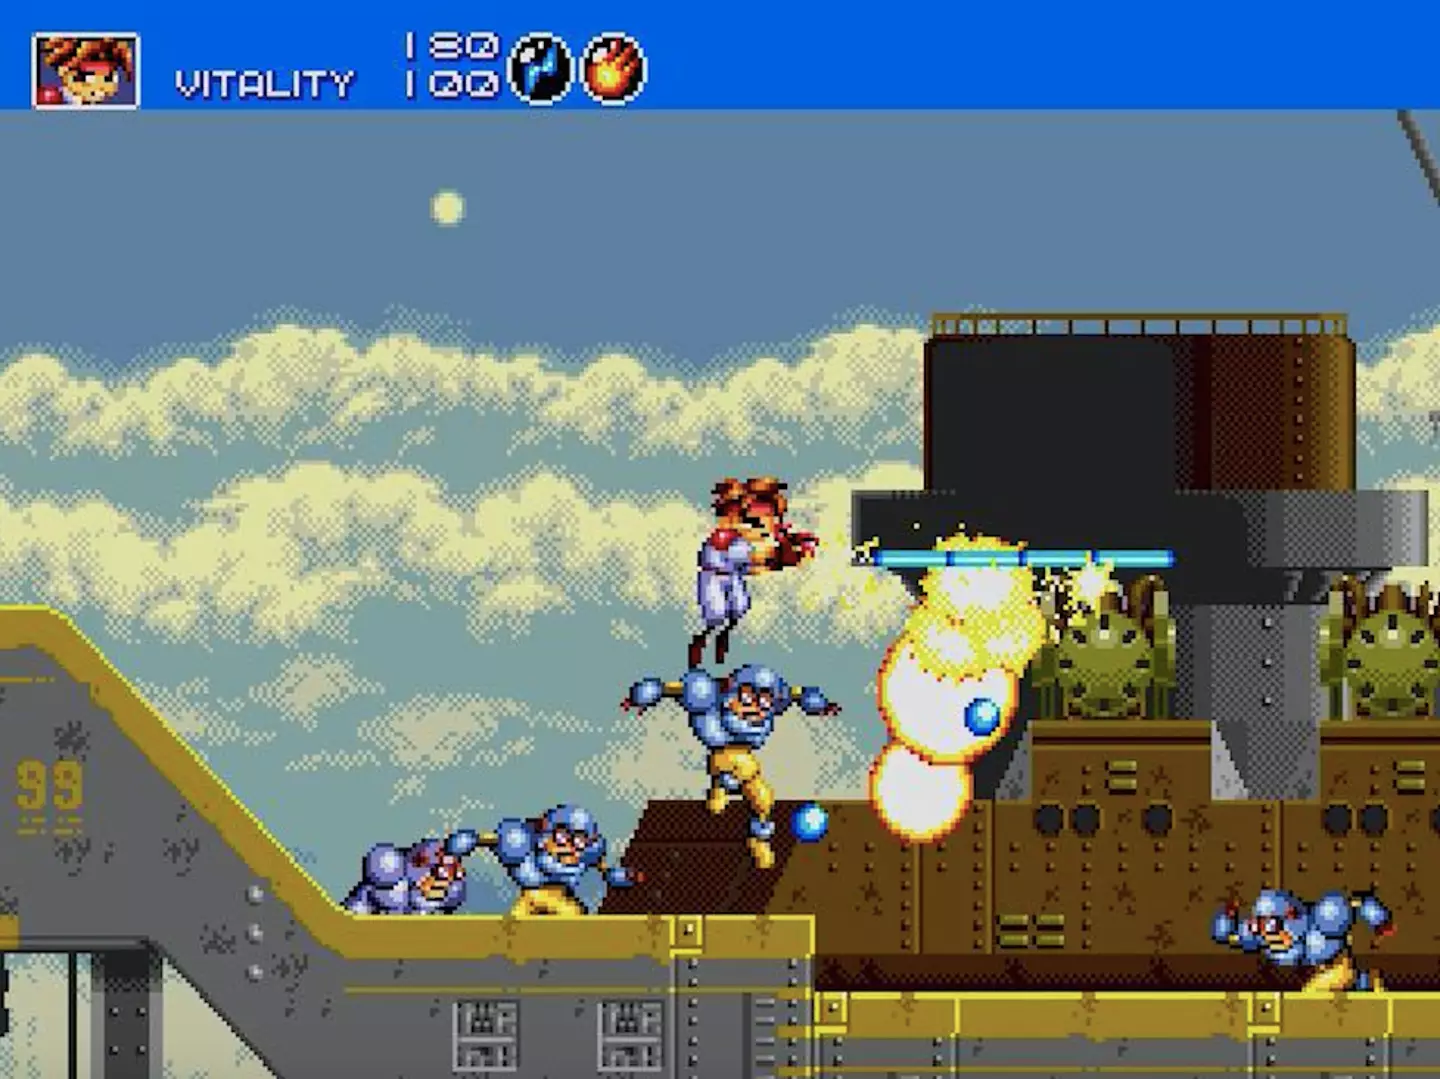 Gunstar Heroes is the high point of Classic Collection /